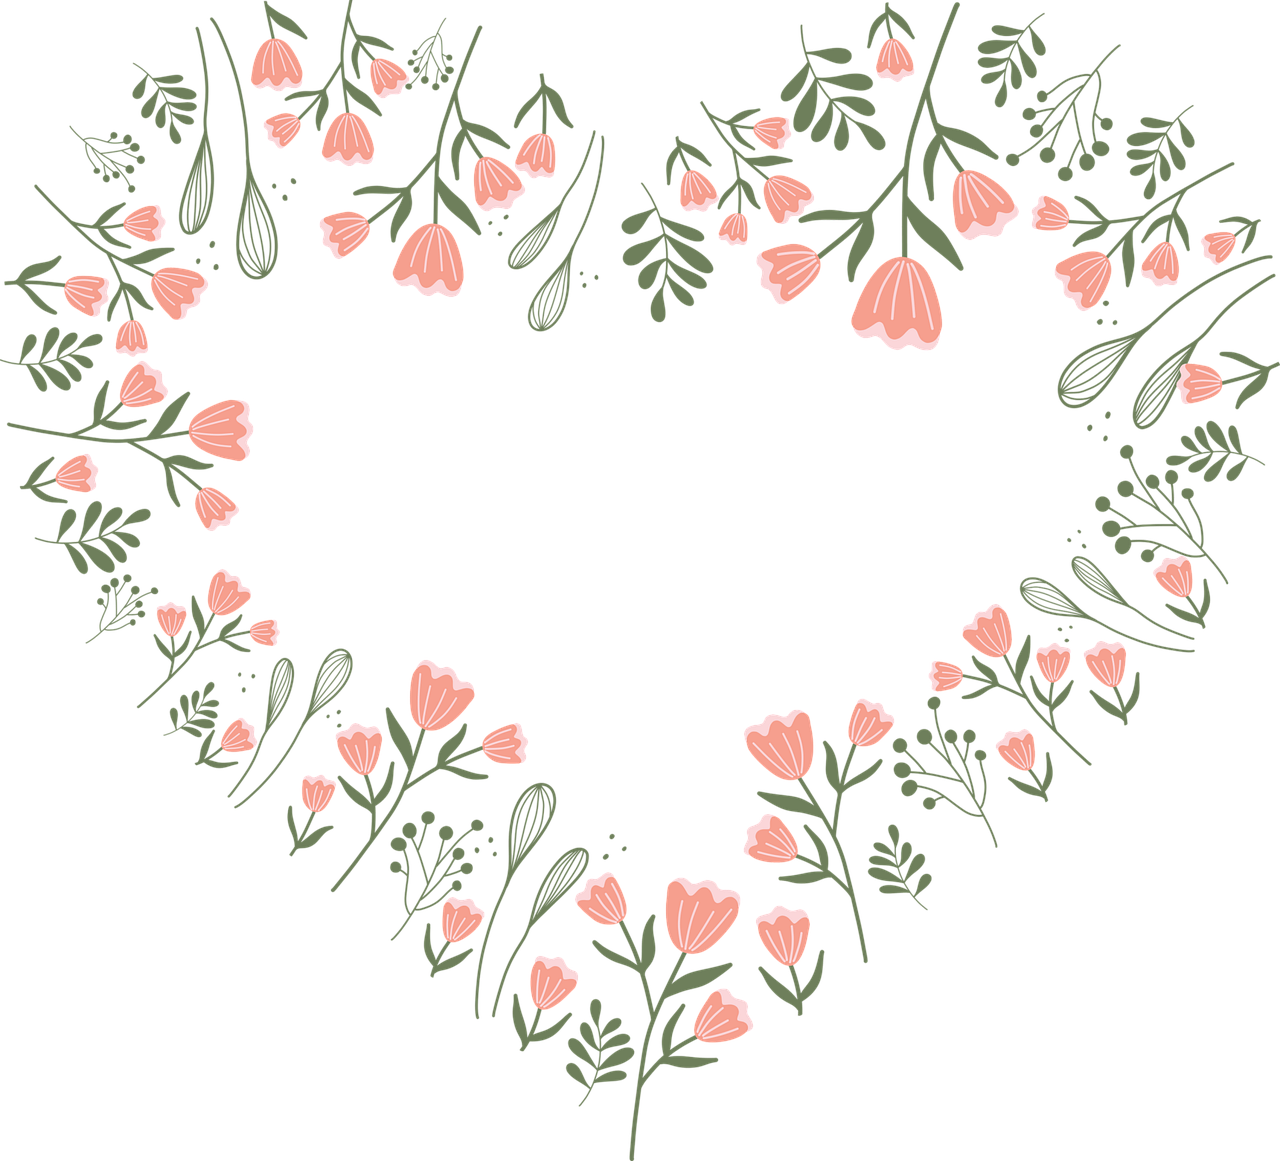 a heart made of flowers on a black background, pixabay, folk art, peach embellishment, inside stylized border, romantic greenery, loosely cropped